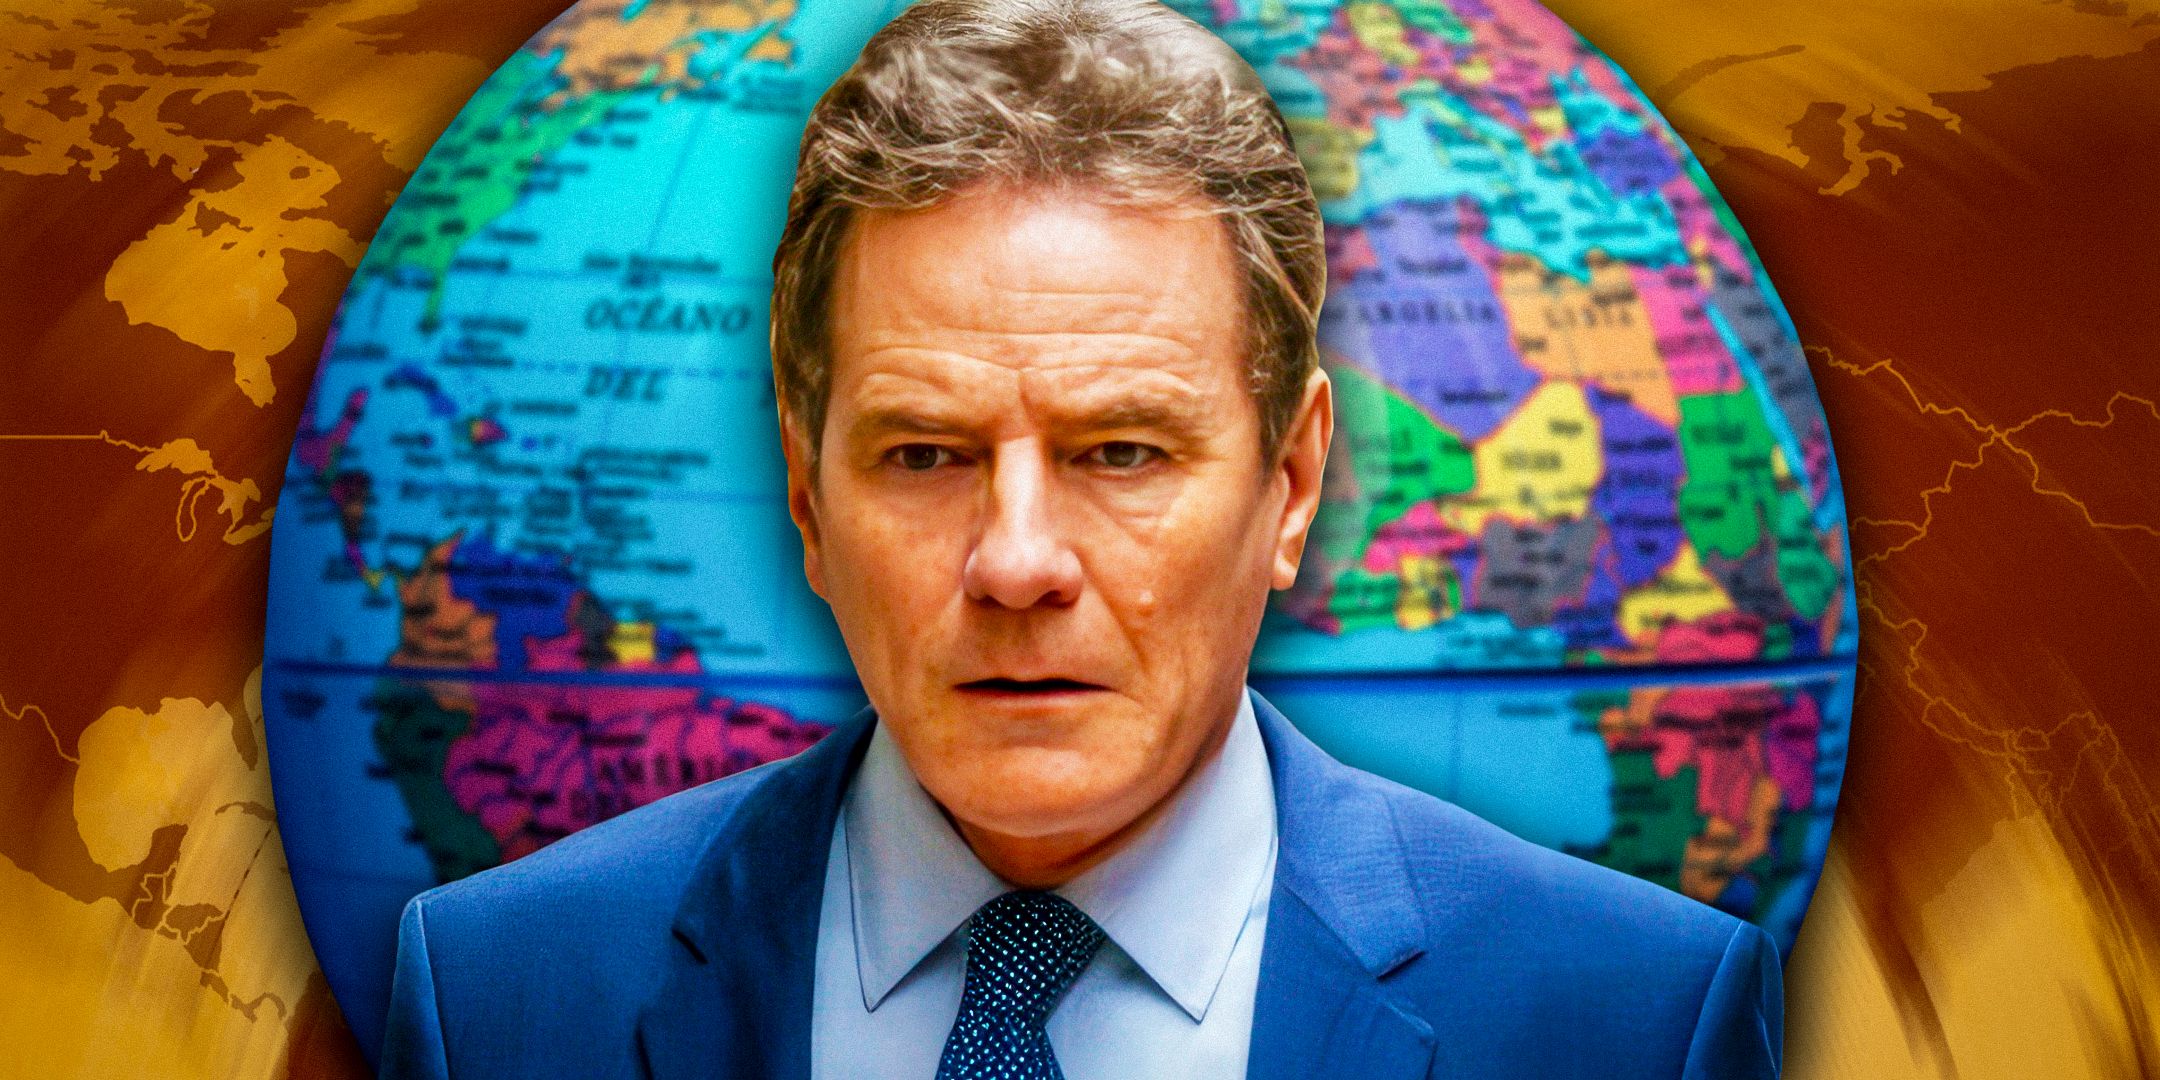 Bryan Cranston as Michael Desiato from Your Honor